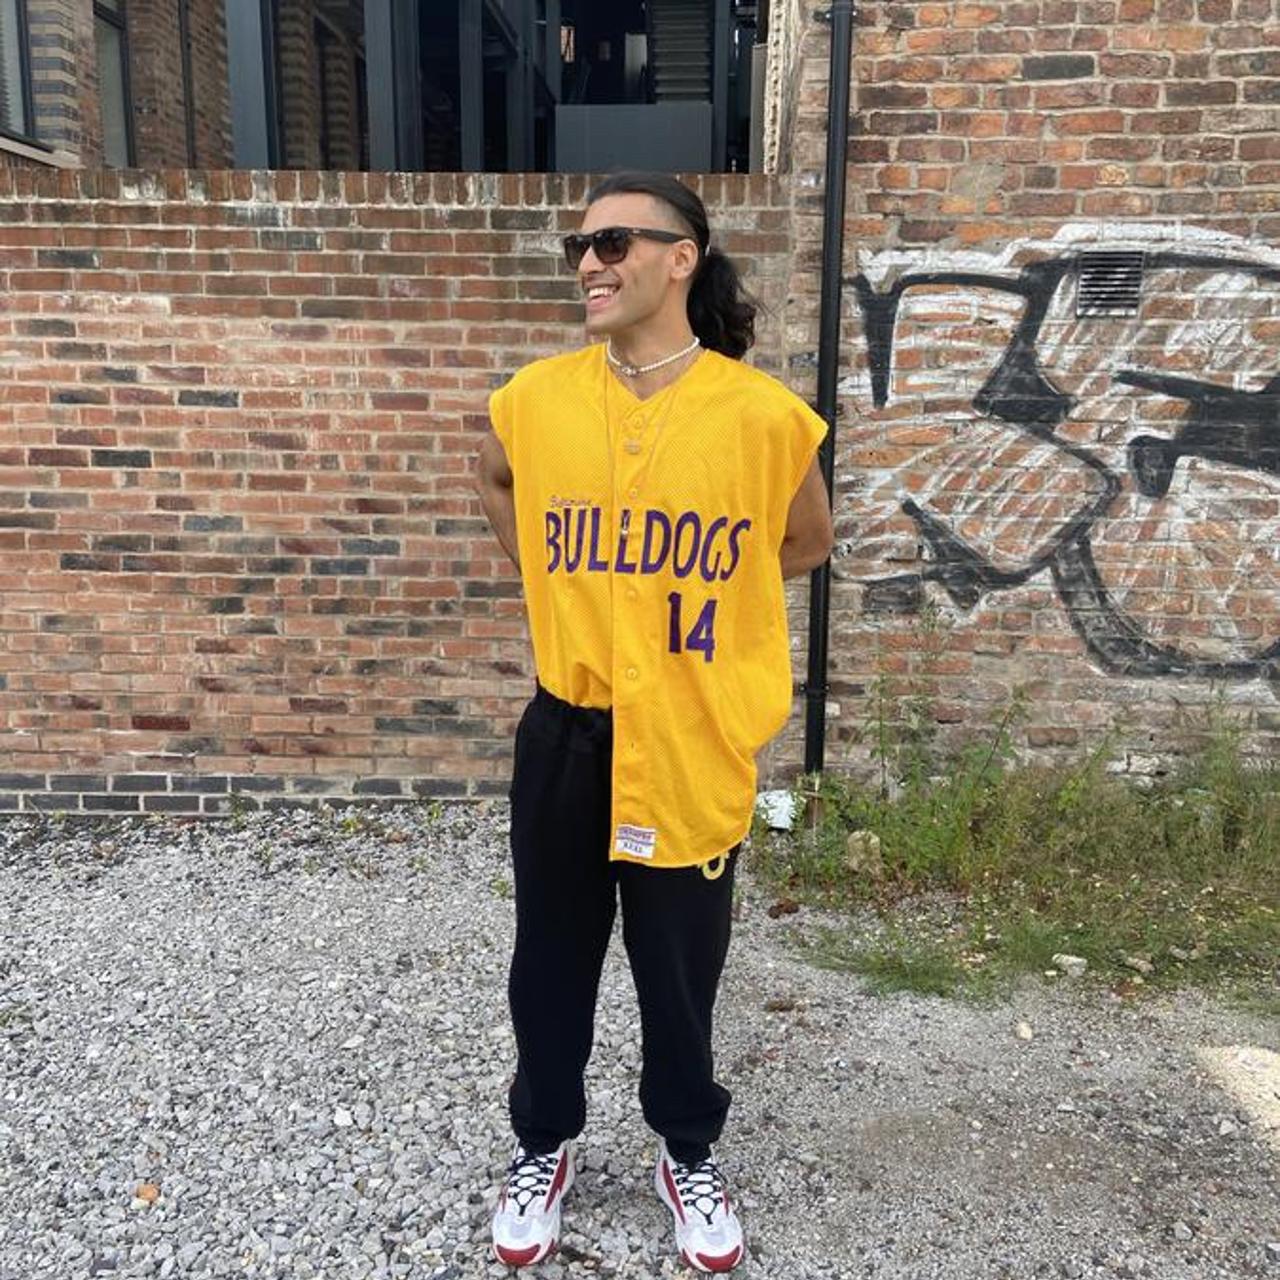 lakers jersey outfit tumblr